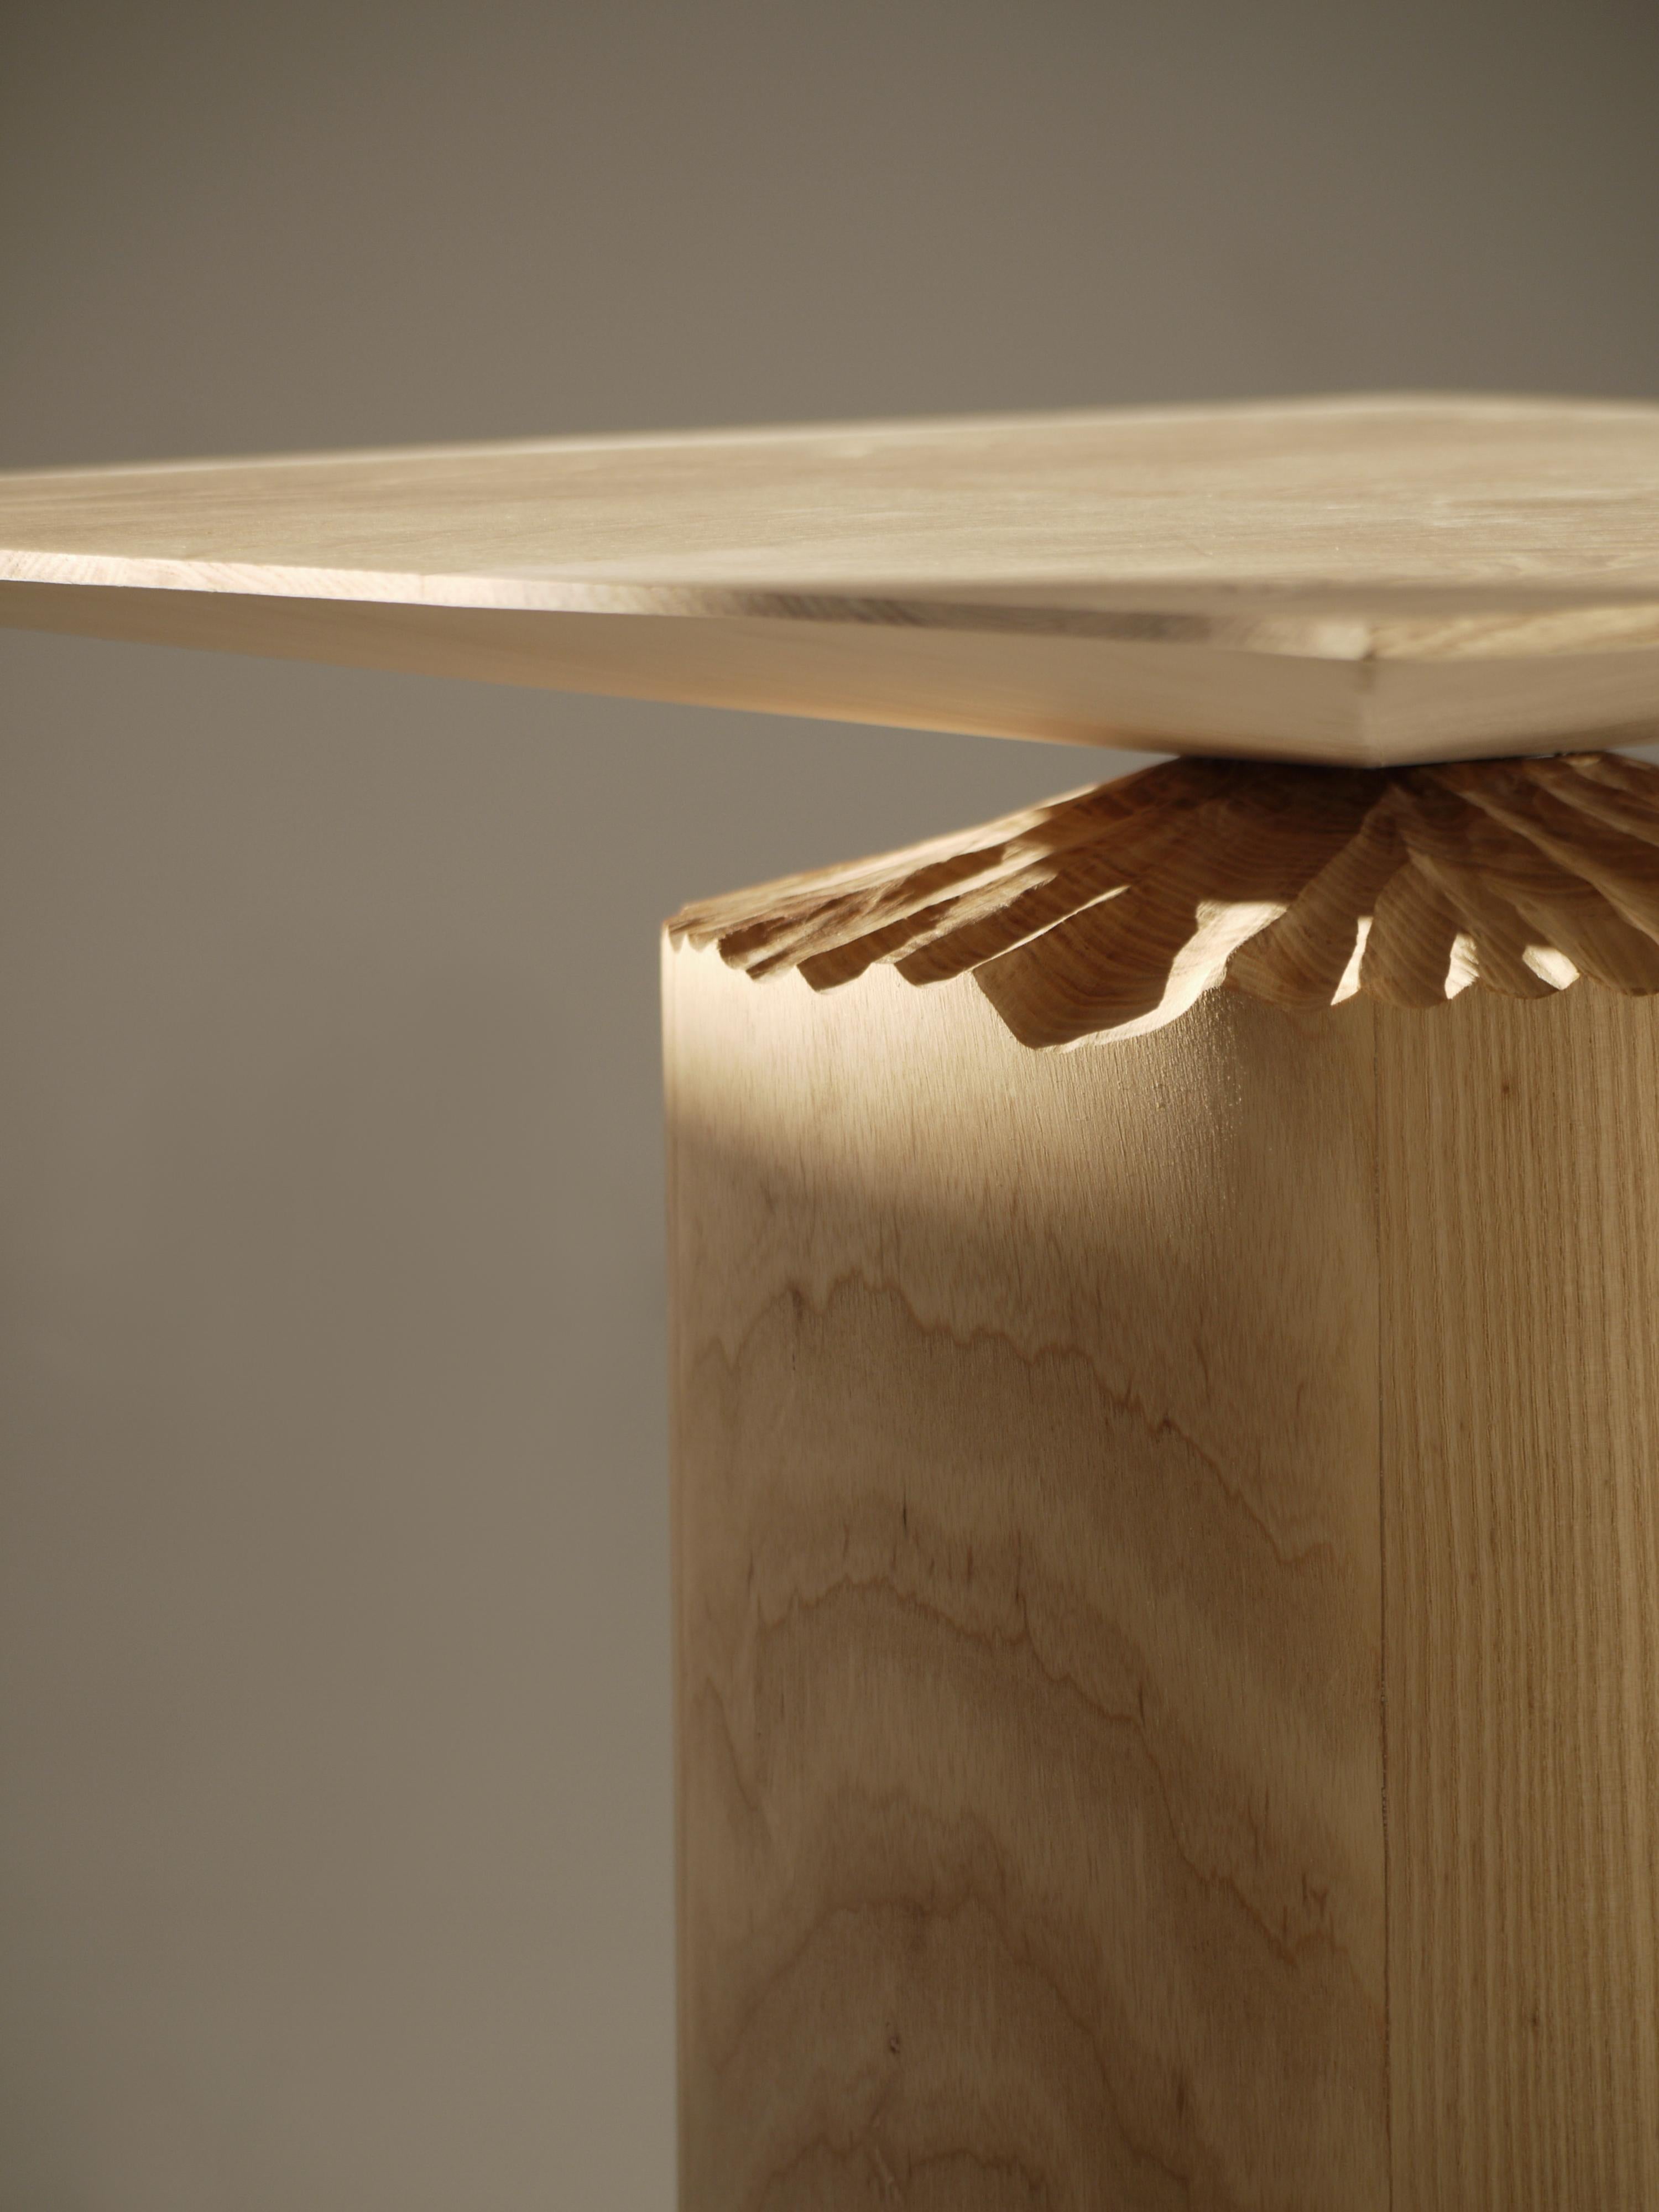 Element is a side table in solid ash that plays with angles and perspectives. Discover the carved detail, inspired by the shape and surface left on trees chewed on by beavers. By referring to the tactility of trees and the warmth of wood, the